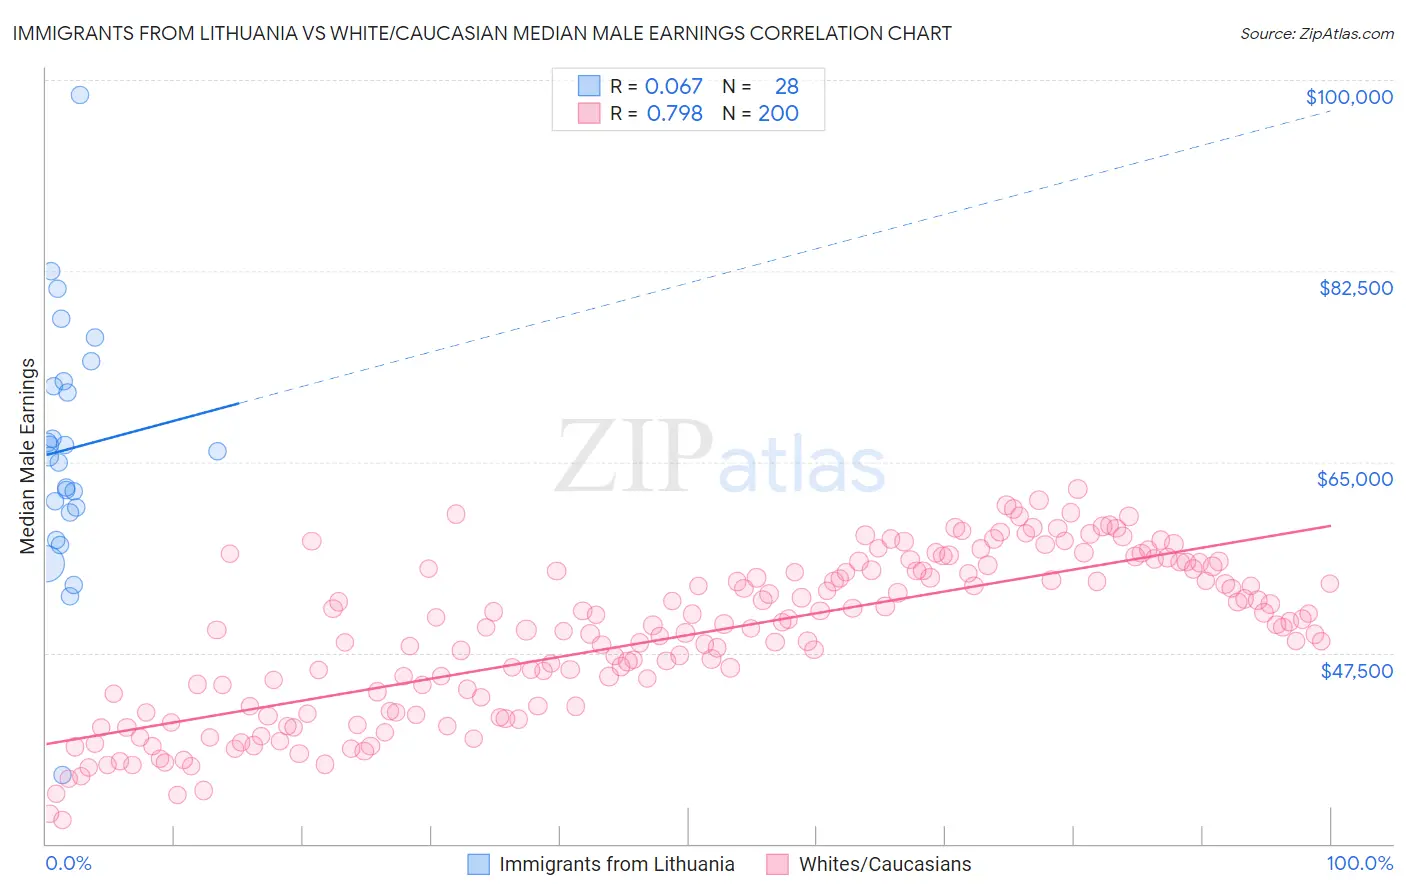 Immigrants from Lithuania vs White/Caucasian Median Male Earnings